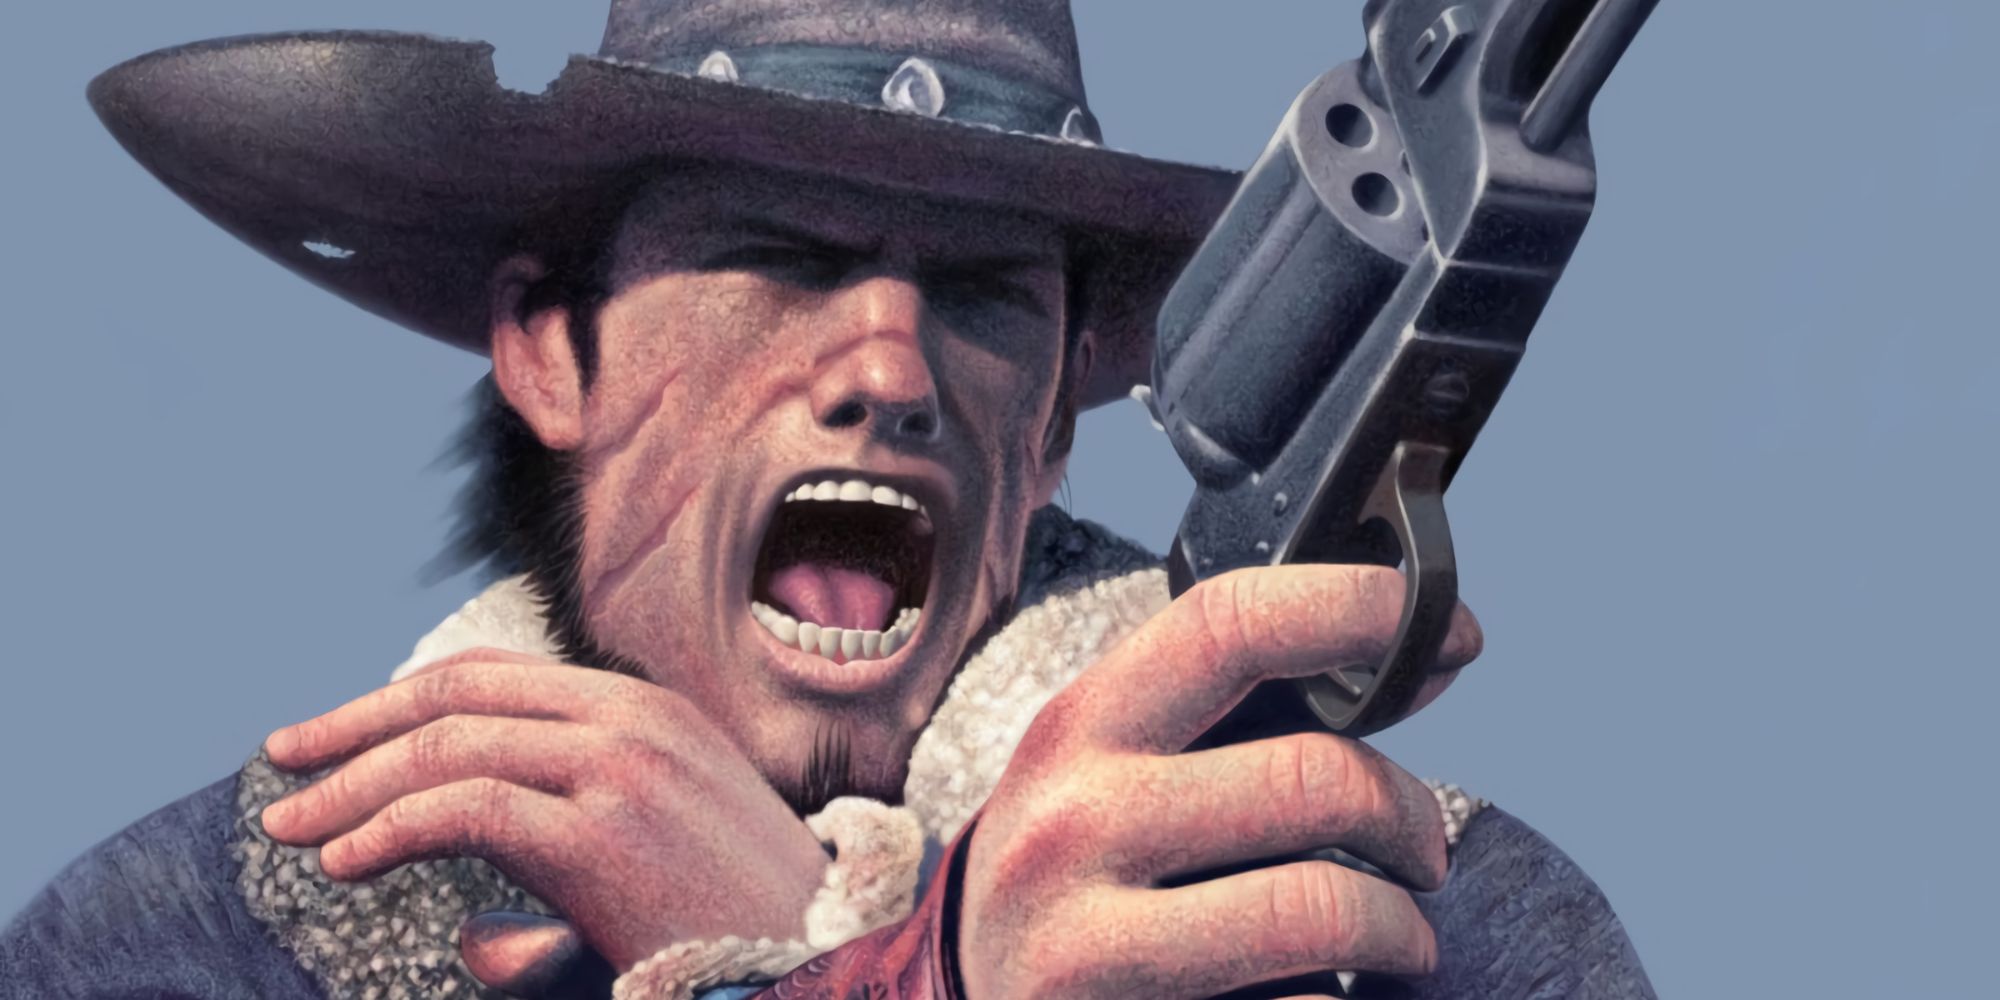 Red Dead Revolver protagonist Red Harlow, pointing a revolver and yelling.